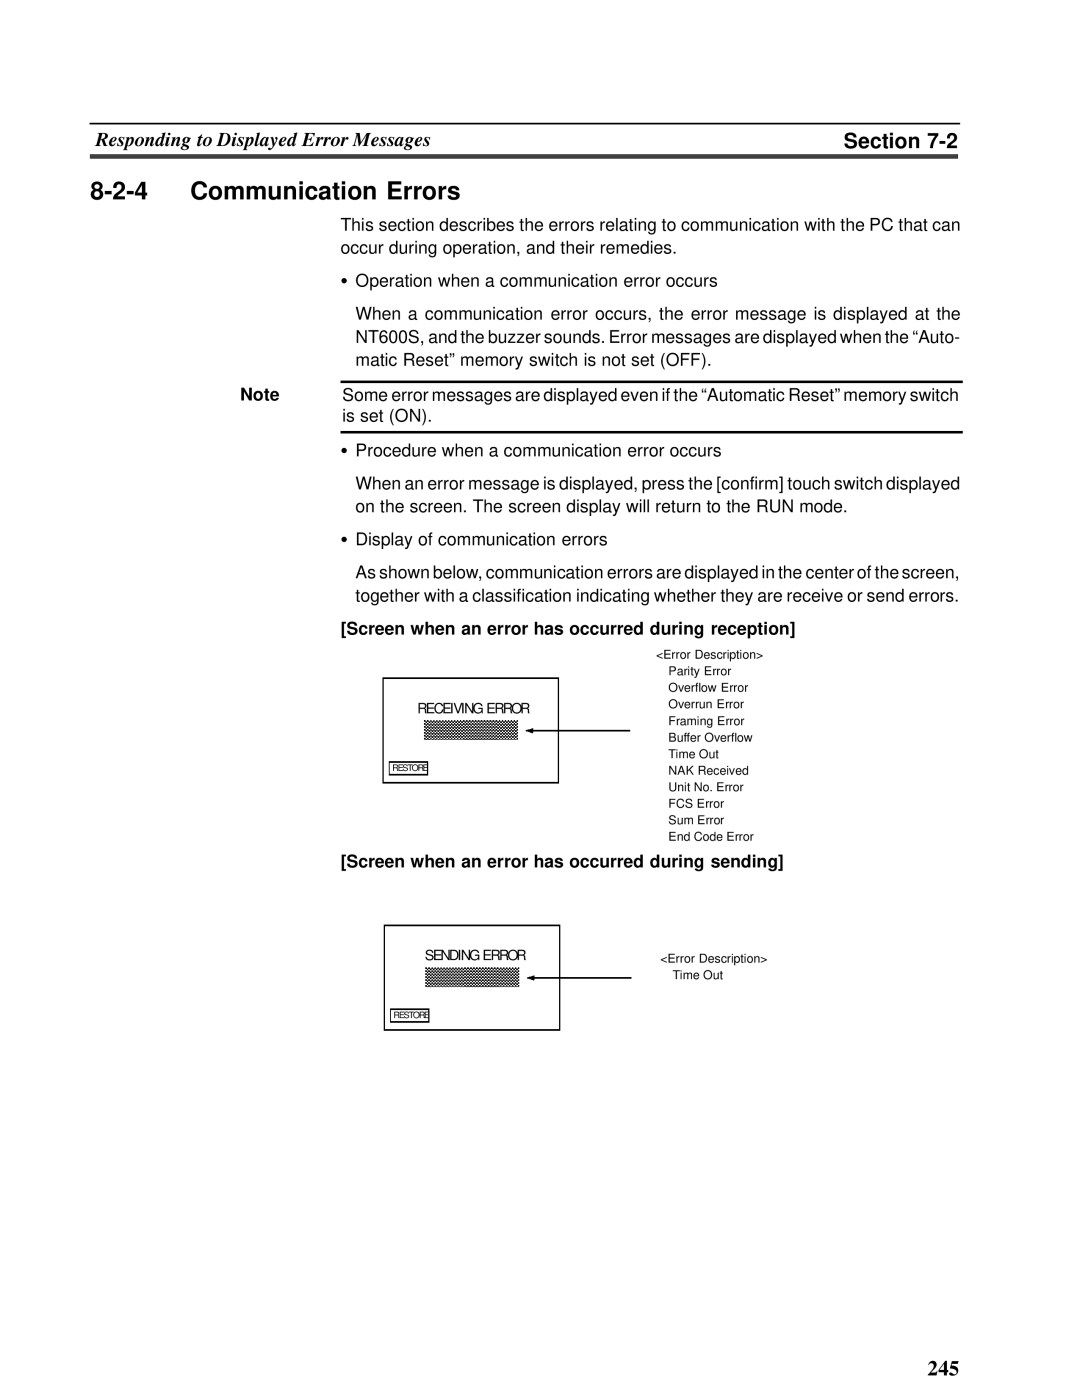 Omron V022-E3-1 operation manual 8-2-4Communication Errors, Section, Screen when an error has occurred during sending 